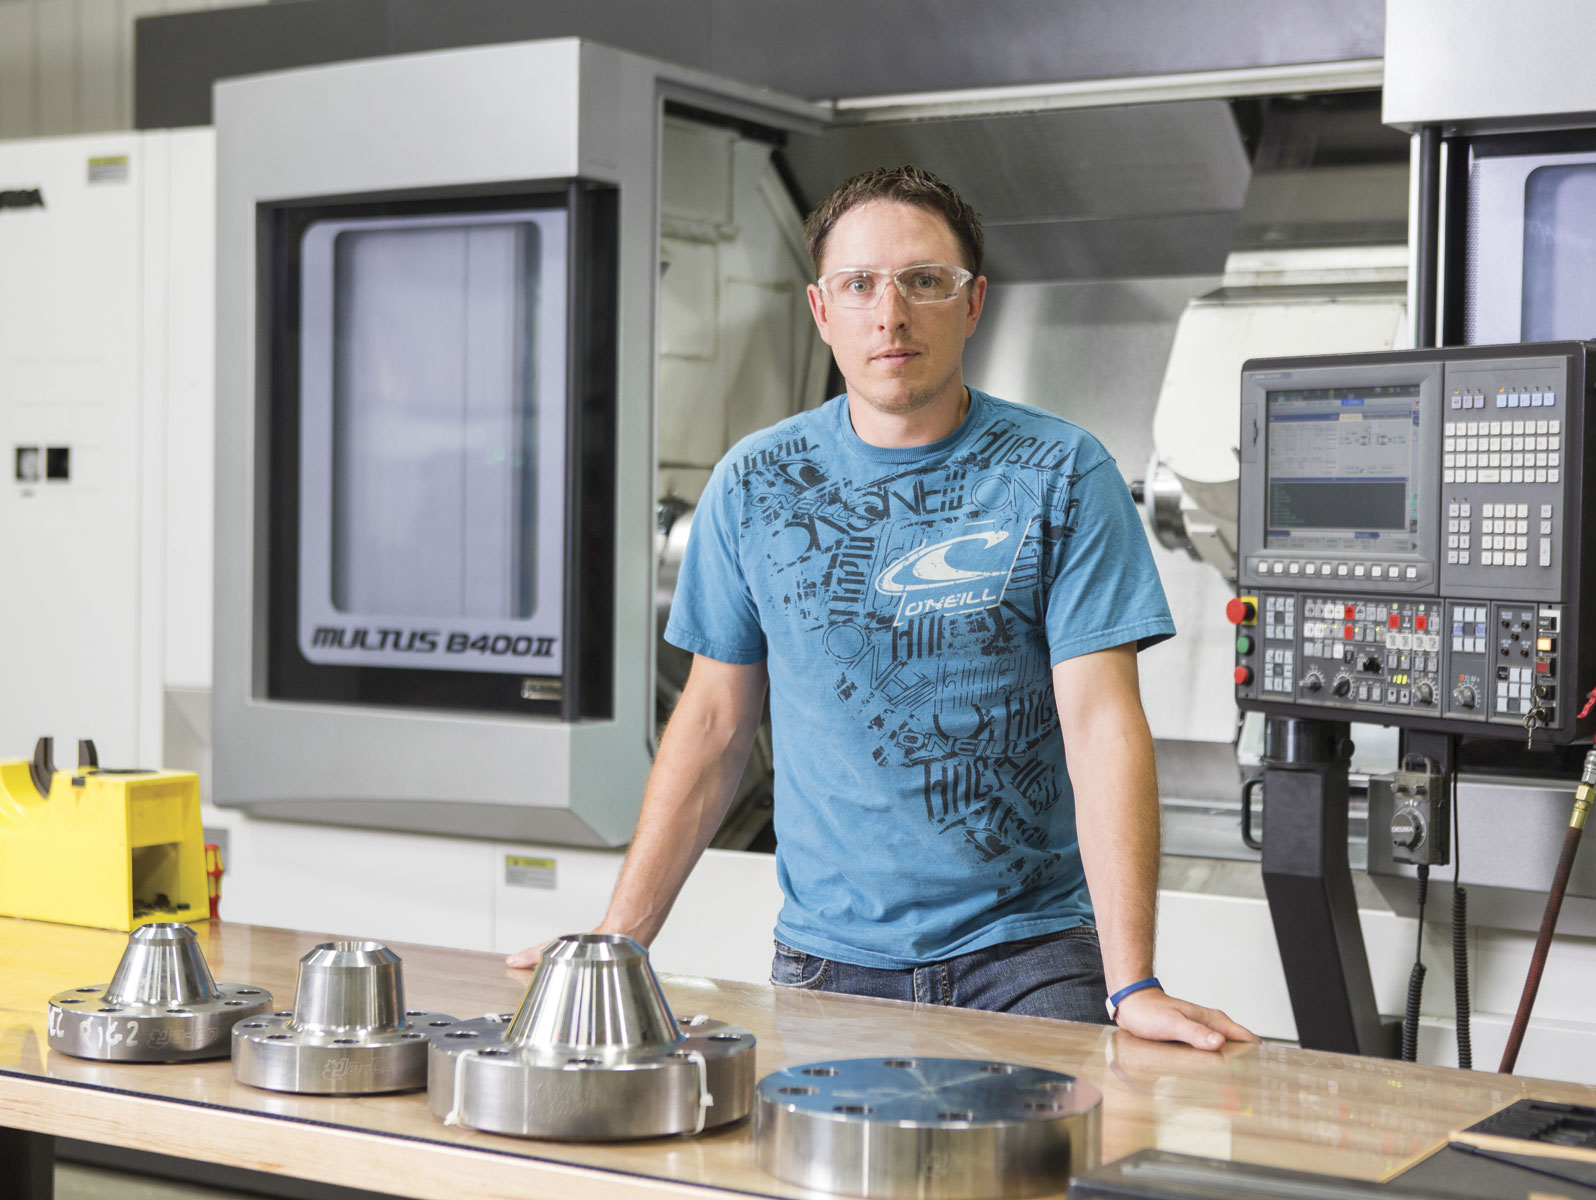 Troy Martyshuk says the transition to CNC technology was a big learning curve, but everyone is better for it because workers have a higher level of machining skills.